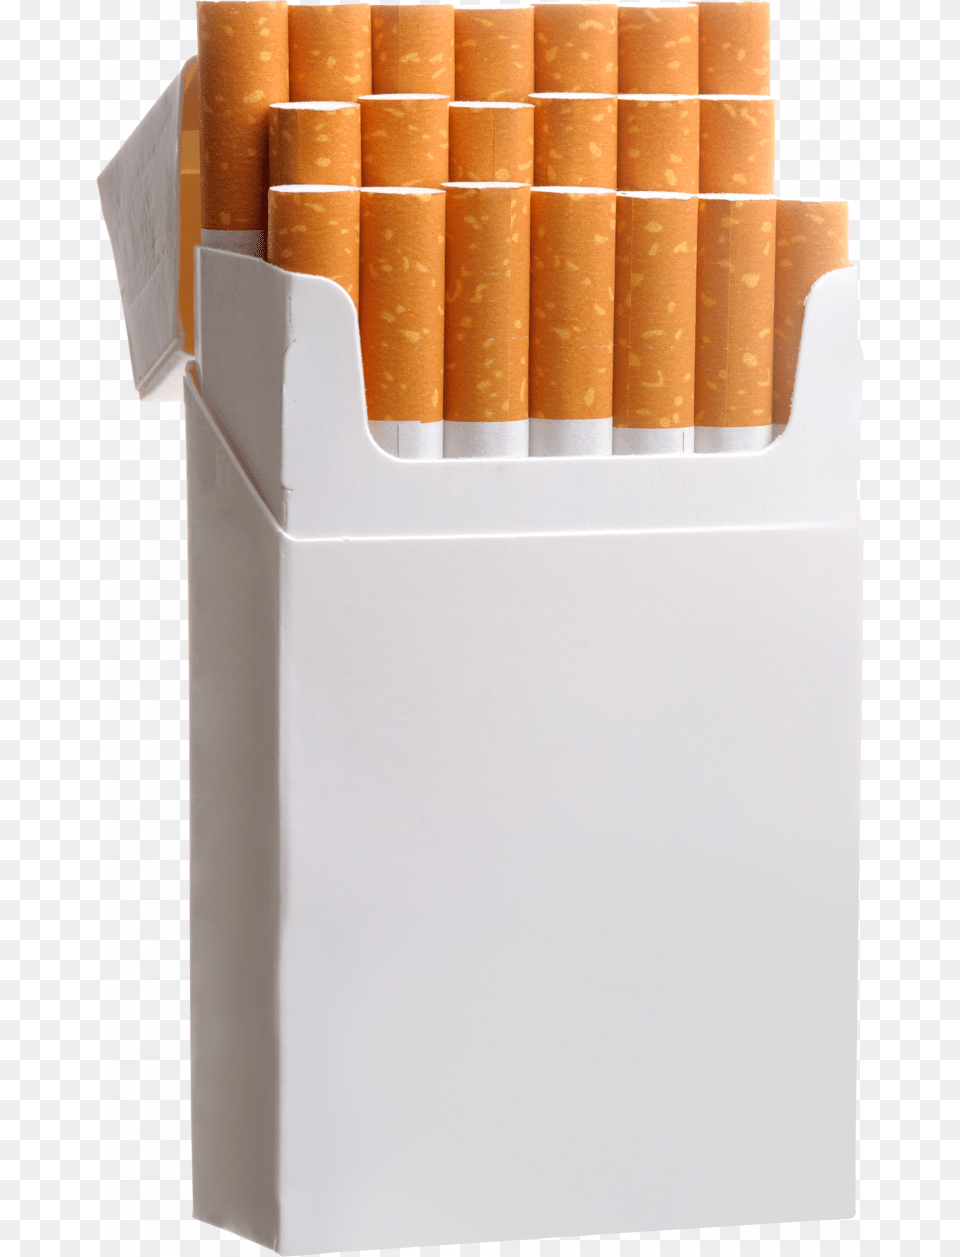 For Cigarette In High Resolution Cigarette Pack Free Png Download